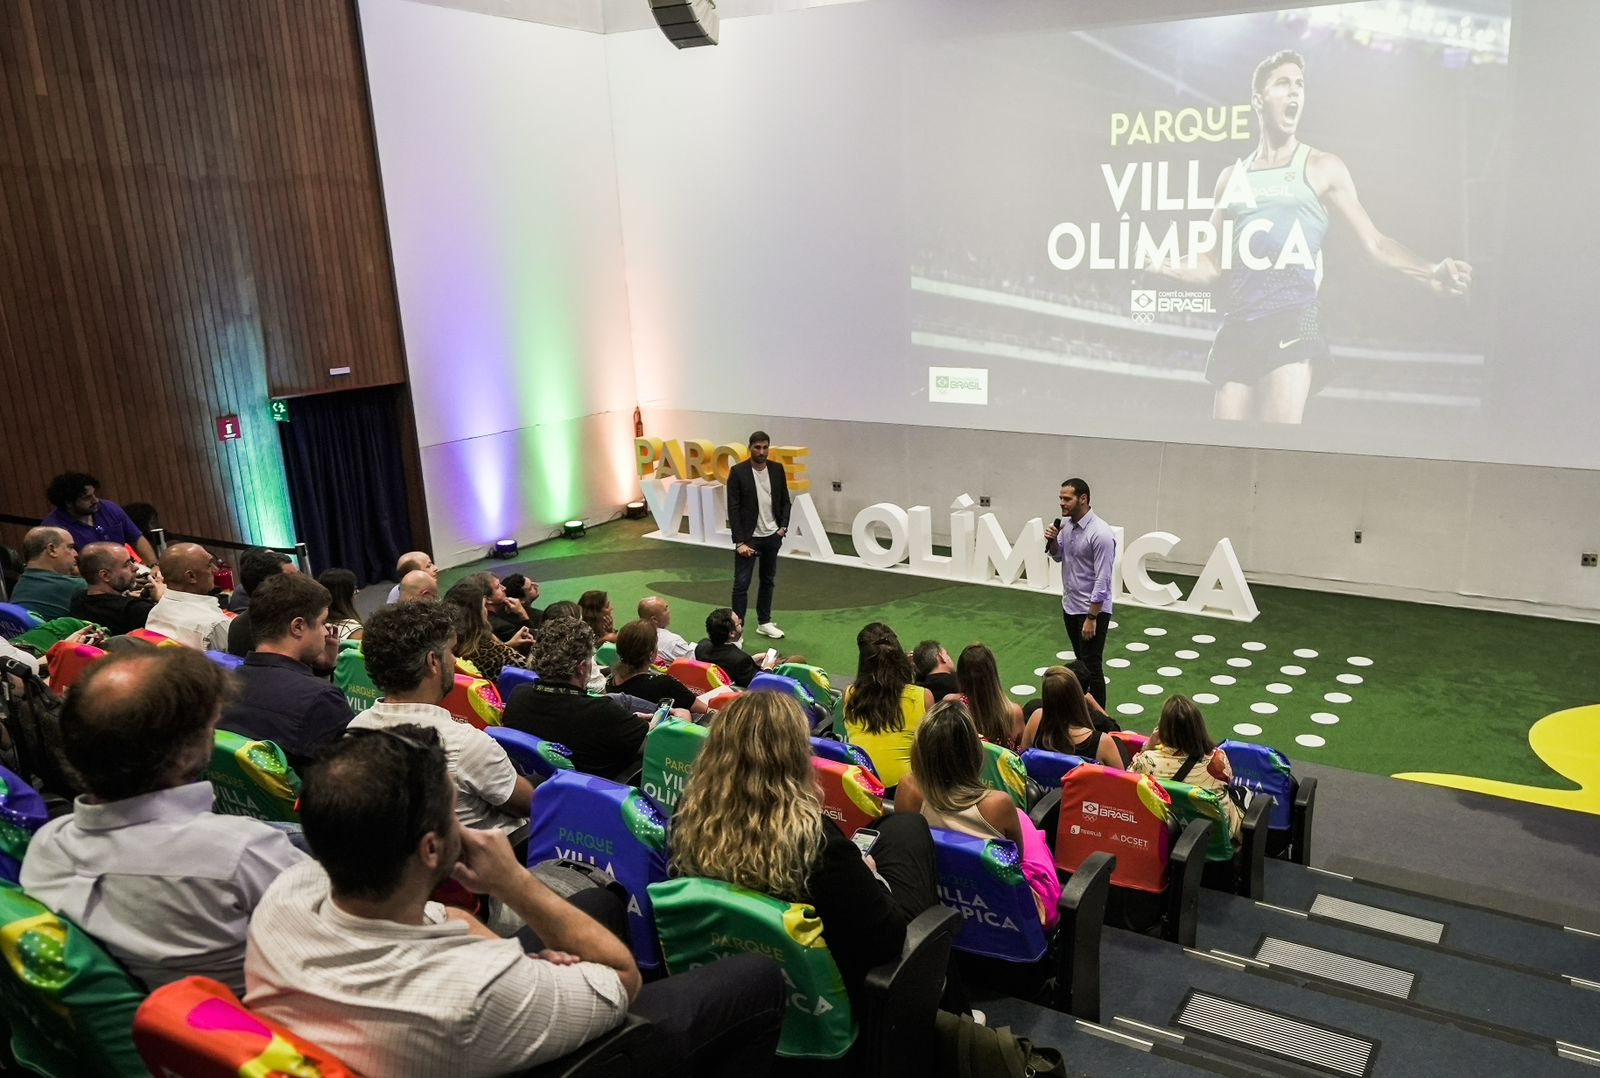 Brazilian Olympic Committee to hold "fan fest" at Villa Lobos Park in São Paulo for Paris 2024 